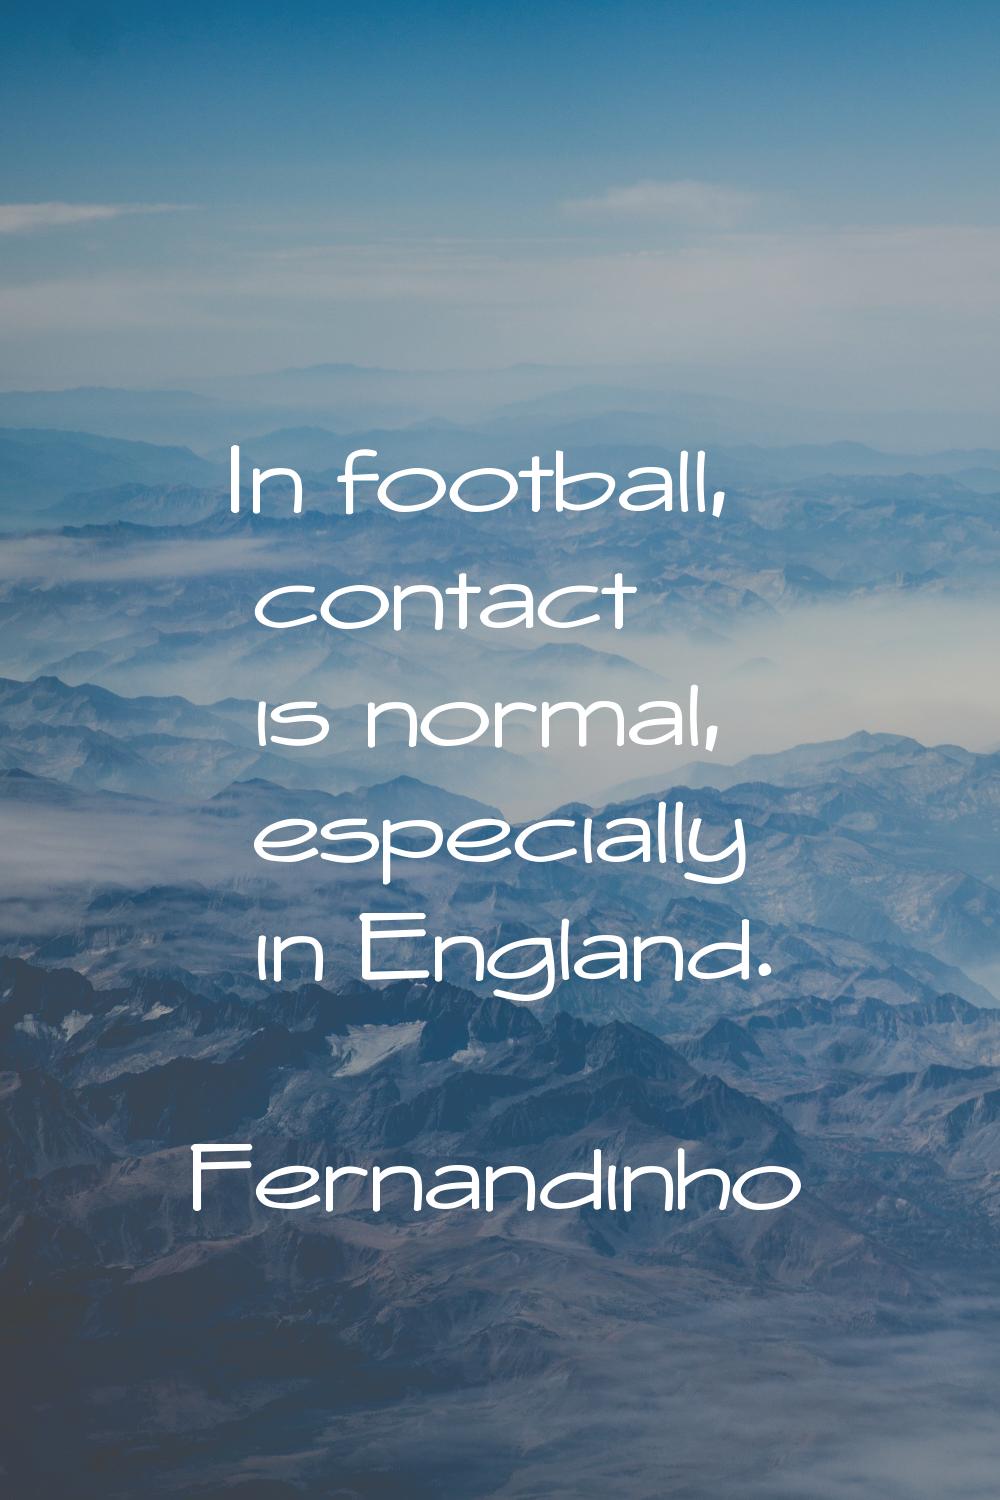 In football, contact is normal, especially in England.